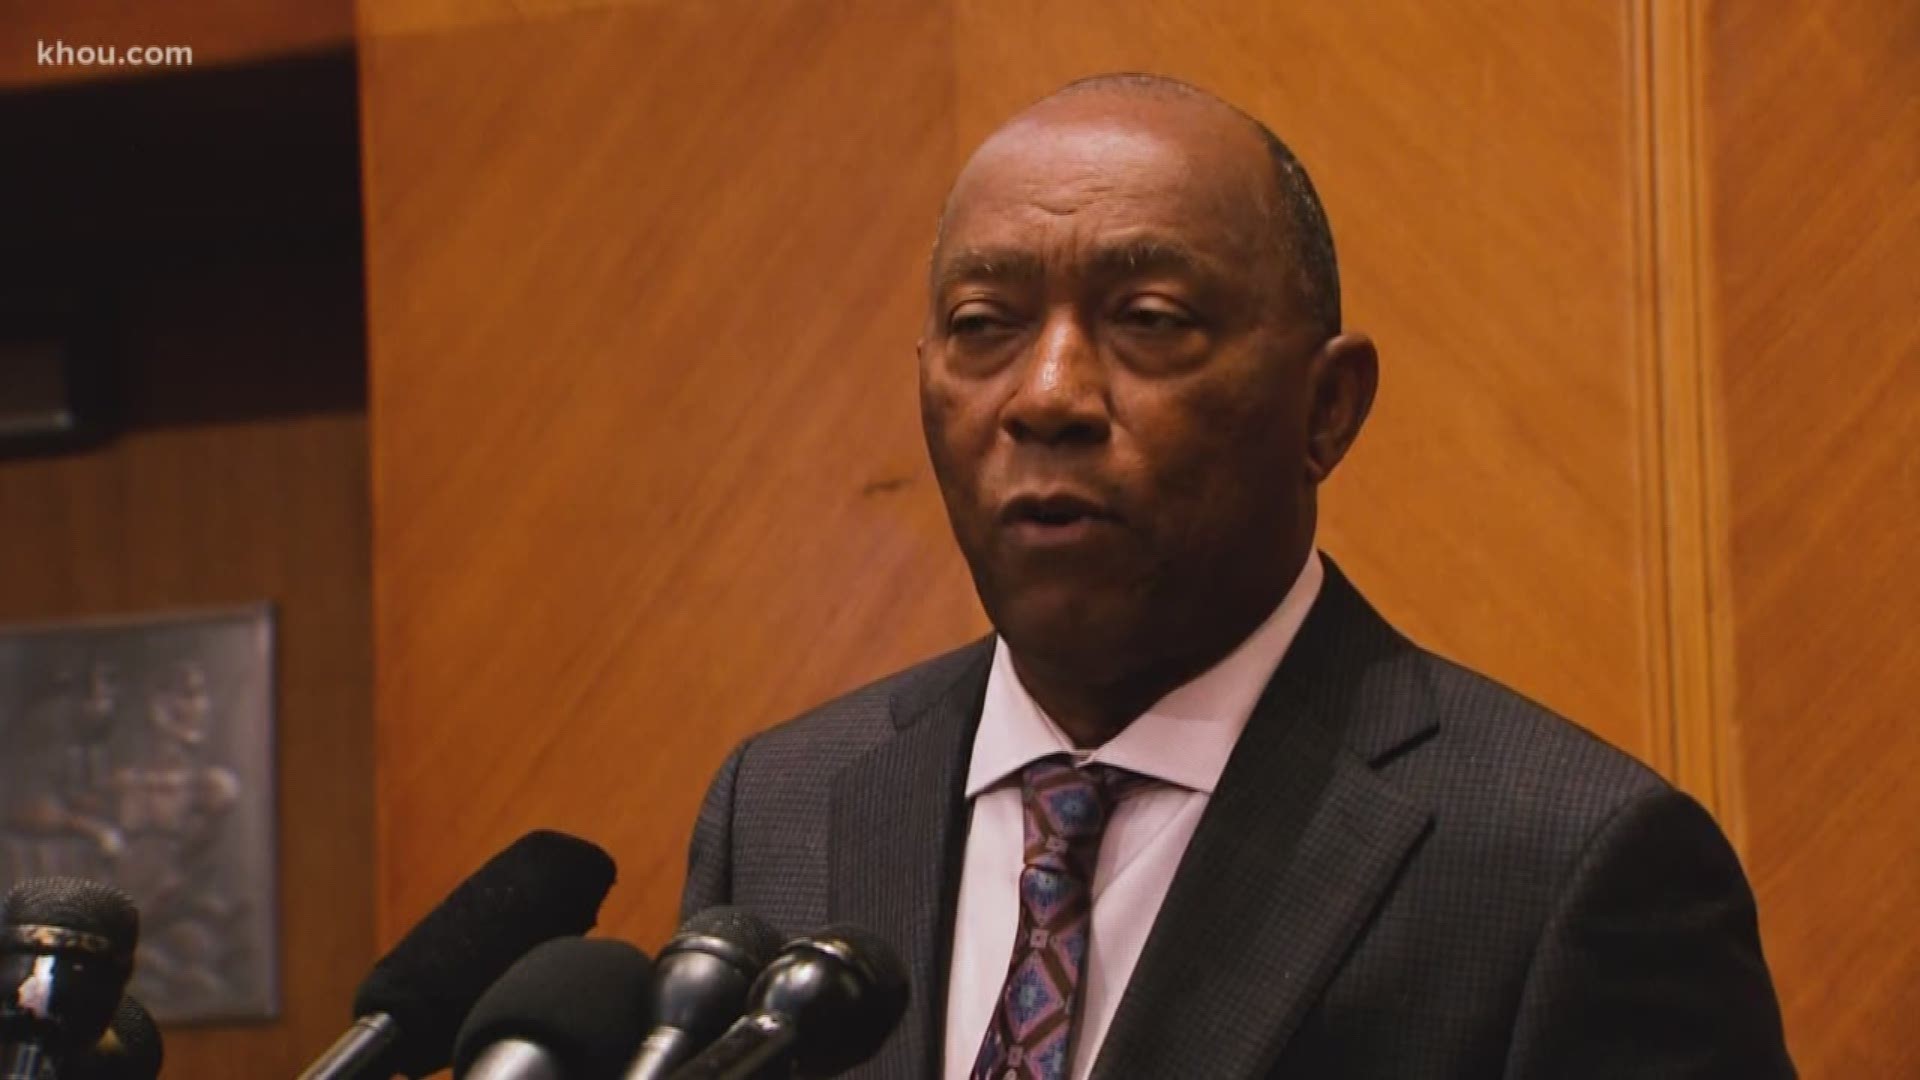 A day after KHOU 11 Investigates revealed a widespread pattern of dumping recyclables at the landfill, Houston Mayor Sylvester Turner declined to address calls for a management shakeup at the city’s Solid Waste Management Department.